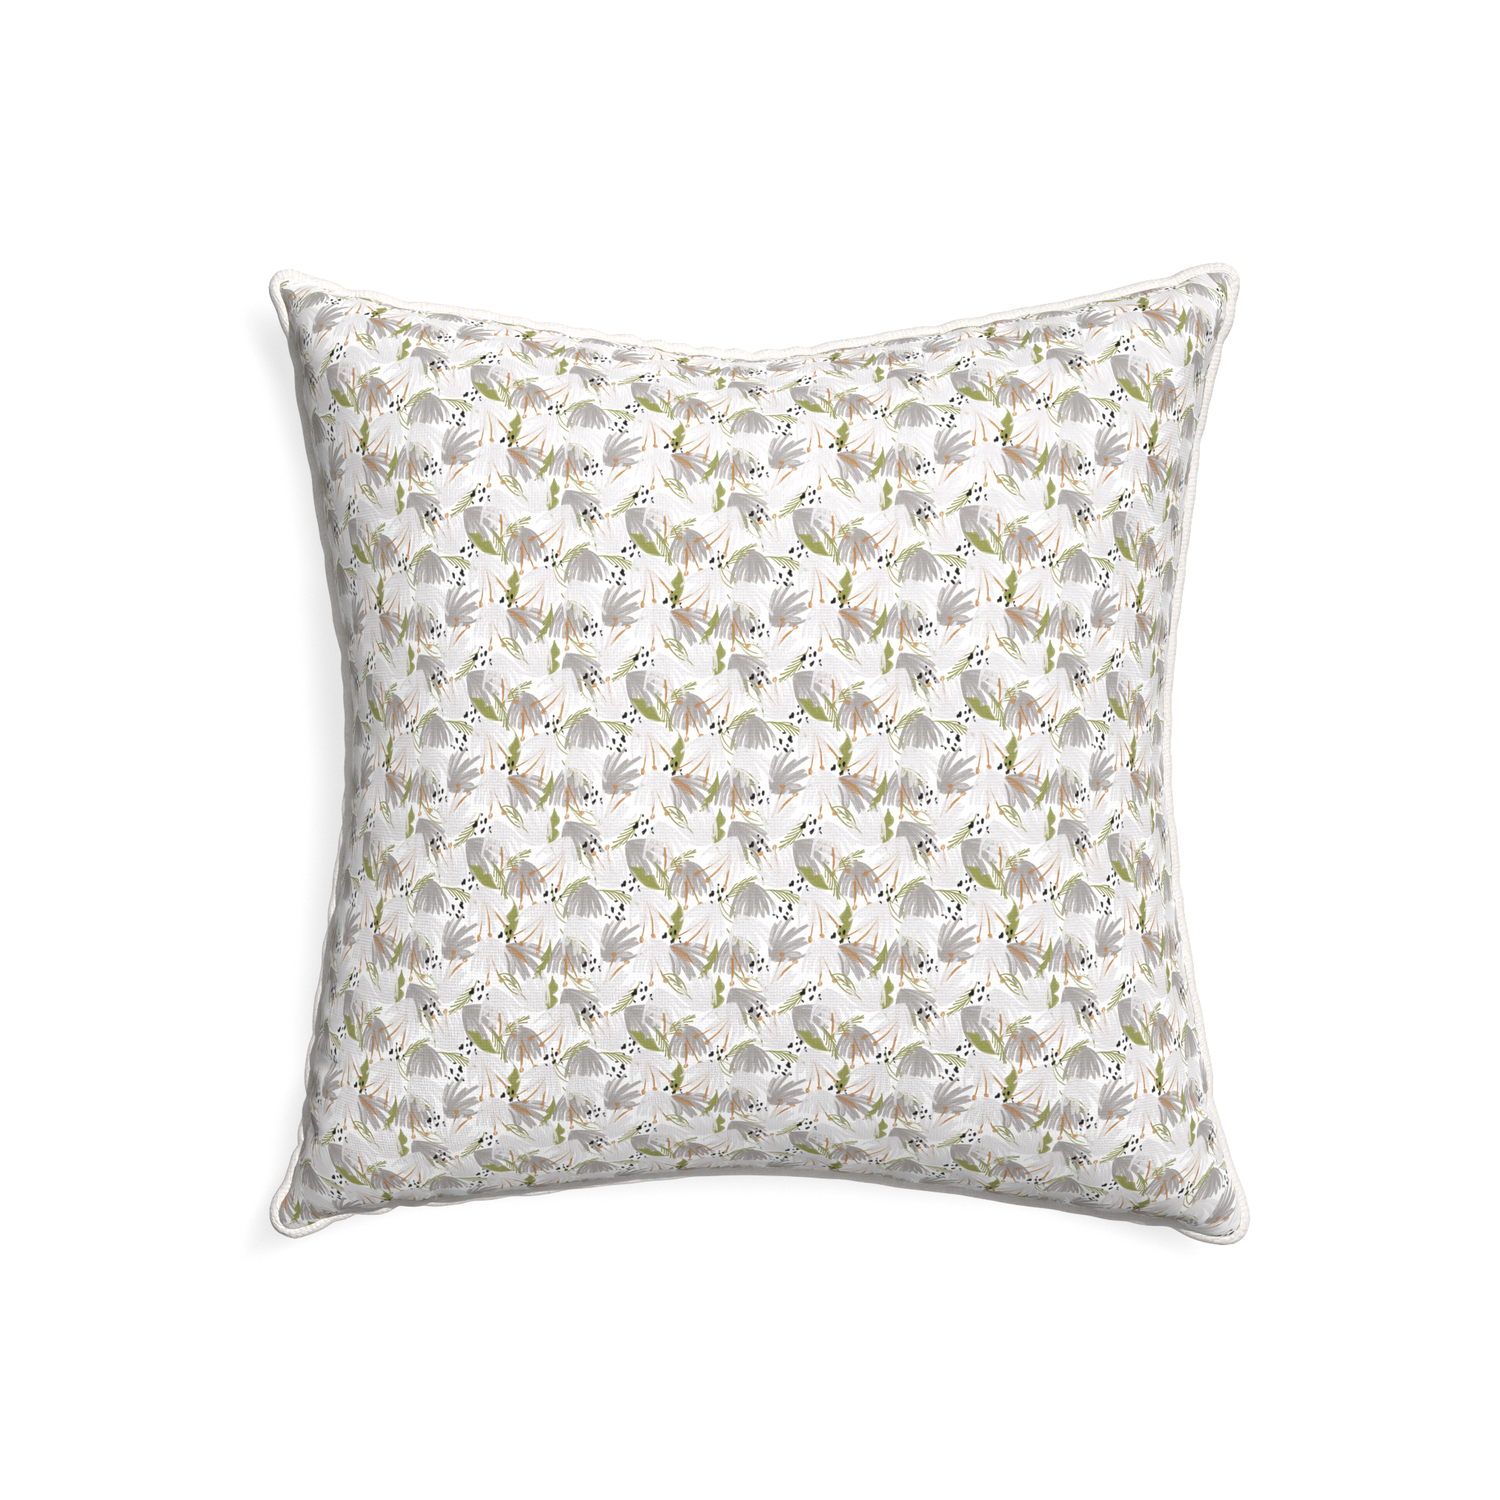 22-square eden grey custom grey floralpillow with snow piping on white background